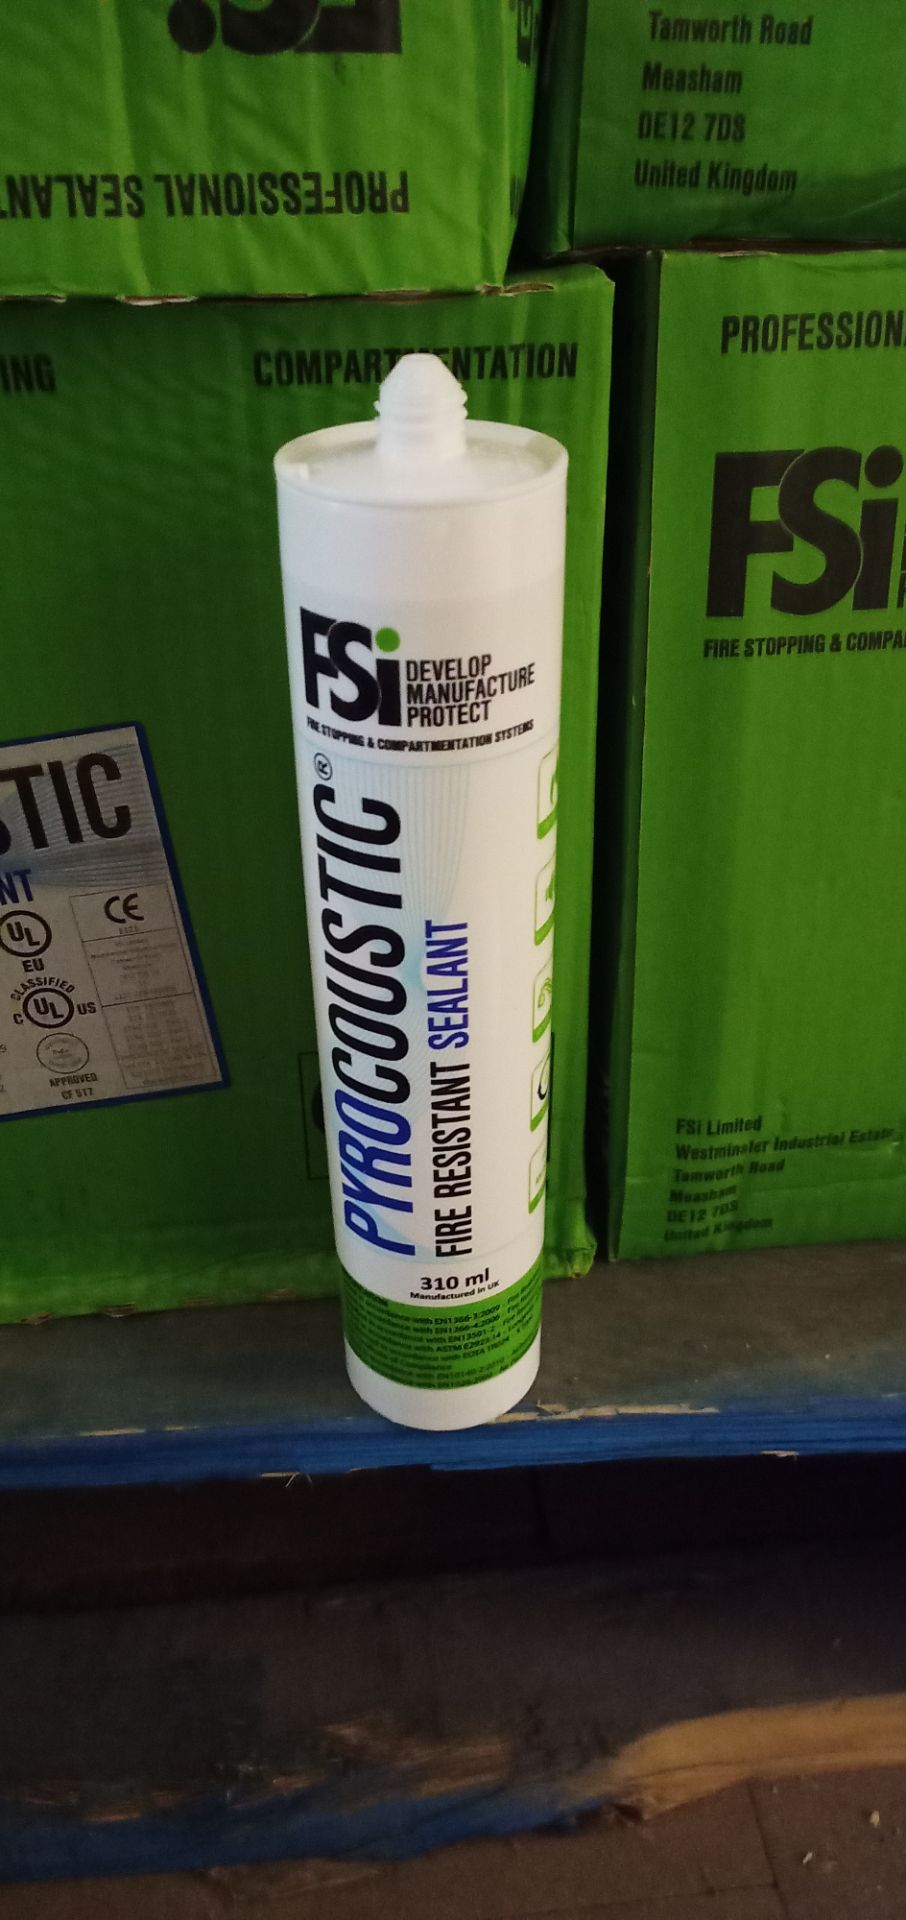 100 x BRAND NEW AND SEALED PYROCOUSTIC SEALANT, RRP £2.99 PER TUBE *PLUS VAT*